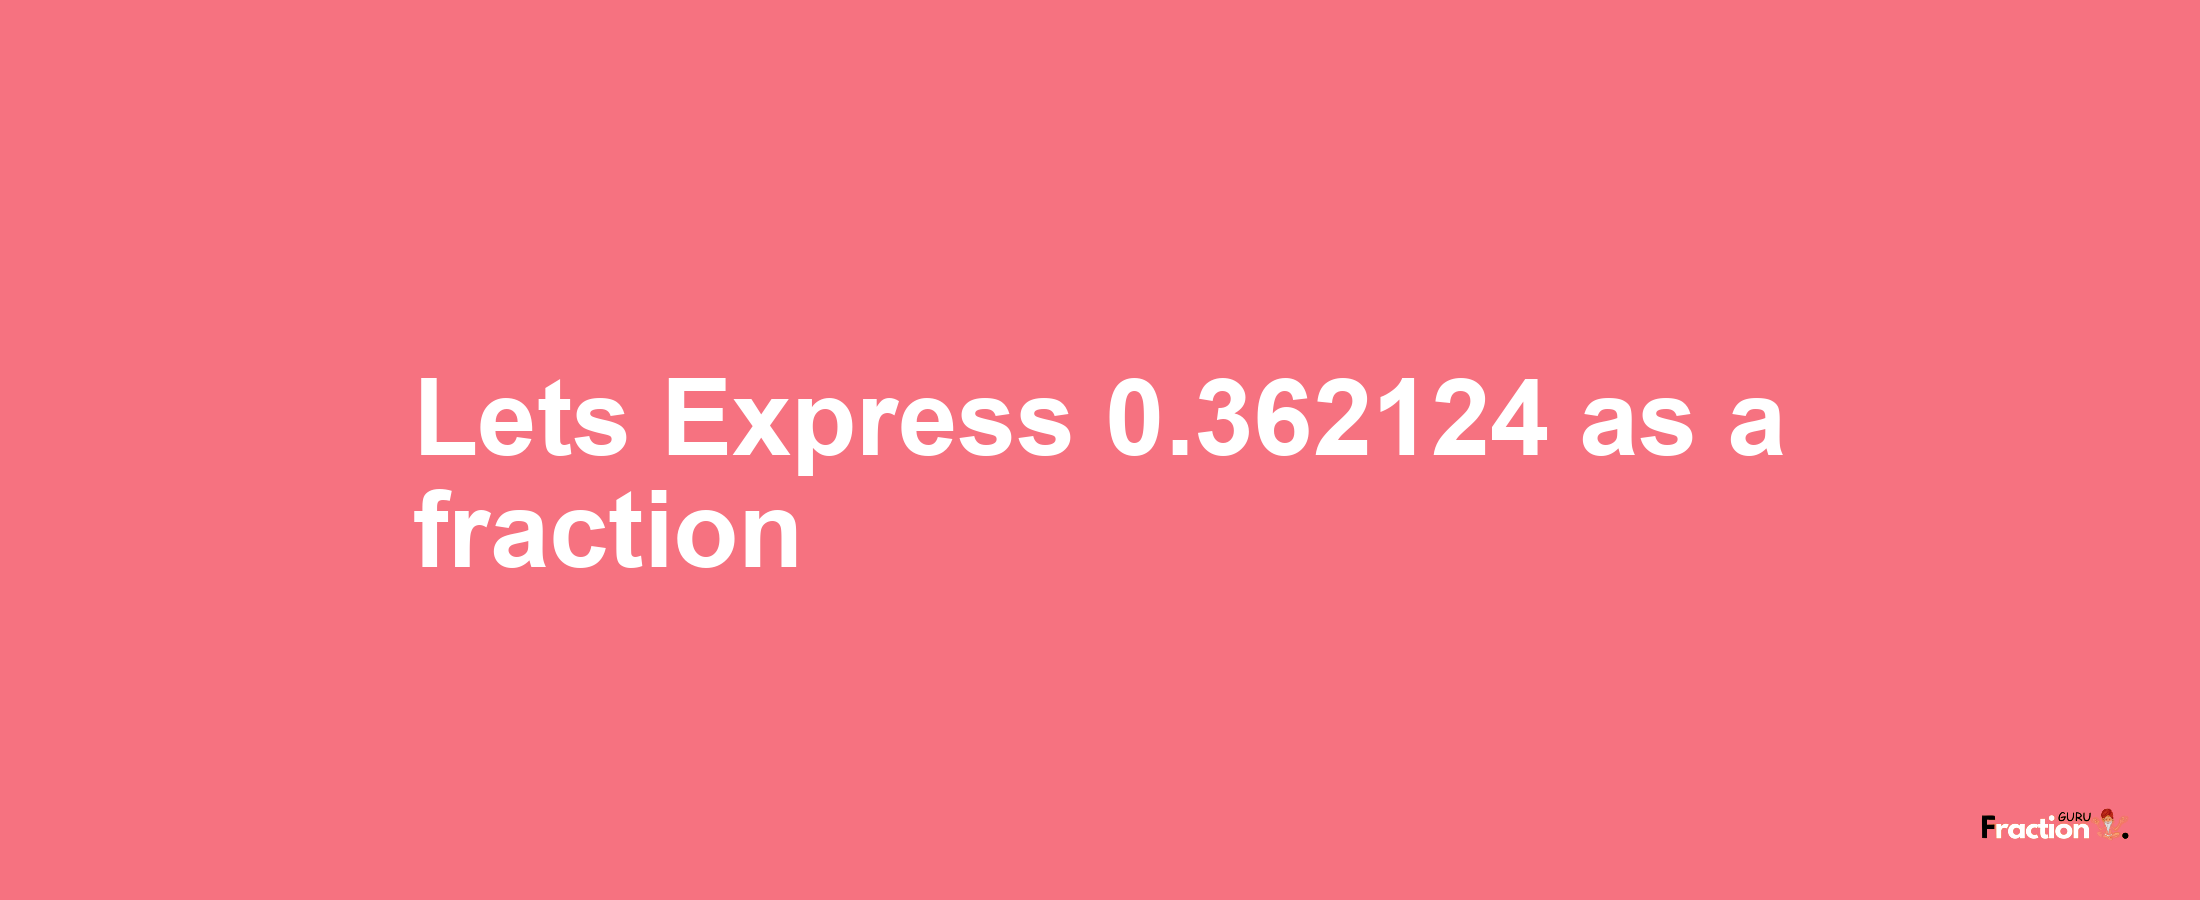 Lets Express 0.362124 as afraction